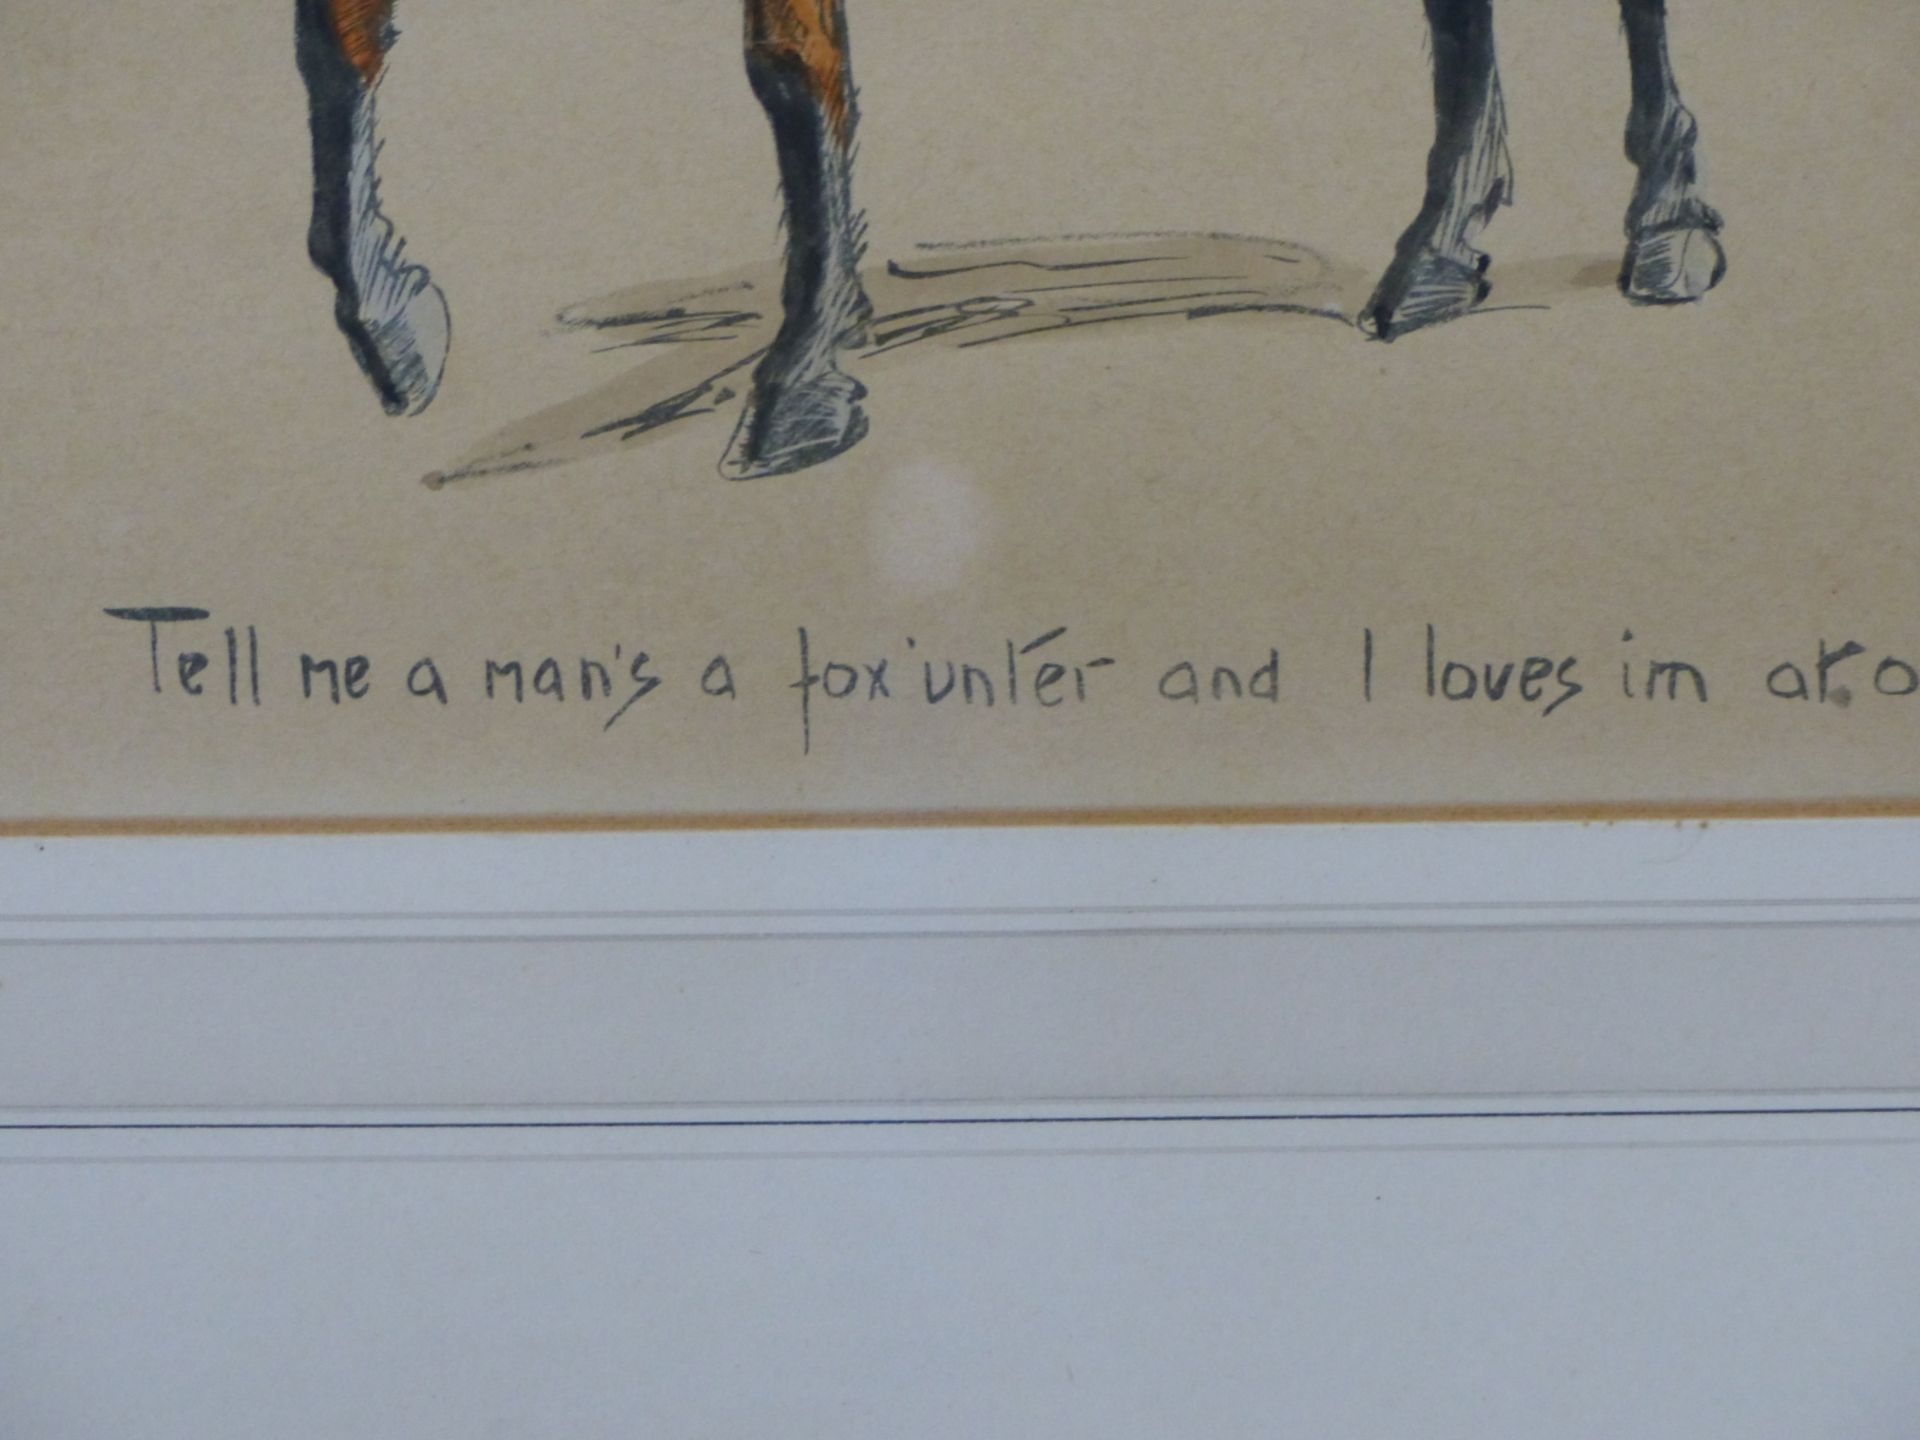 SNAFFLES (CHARLES JOHNSON PAYNE) A COMIC PORTRAIT OF A HUNTSMAN, INSCRIBED TELL ME A MAN'S A FOX' ' - Image 4 of 7